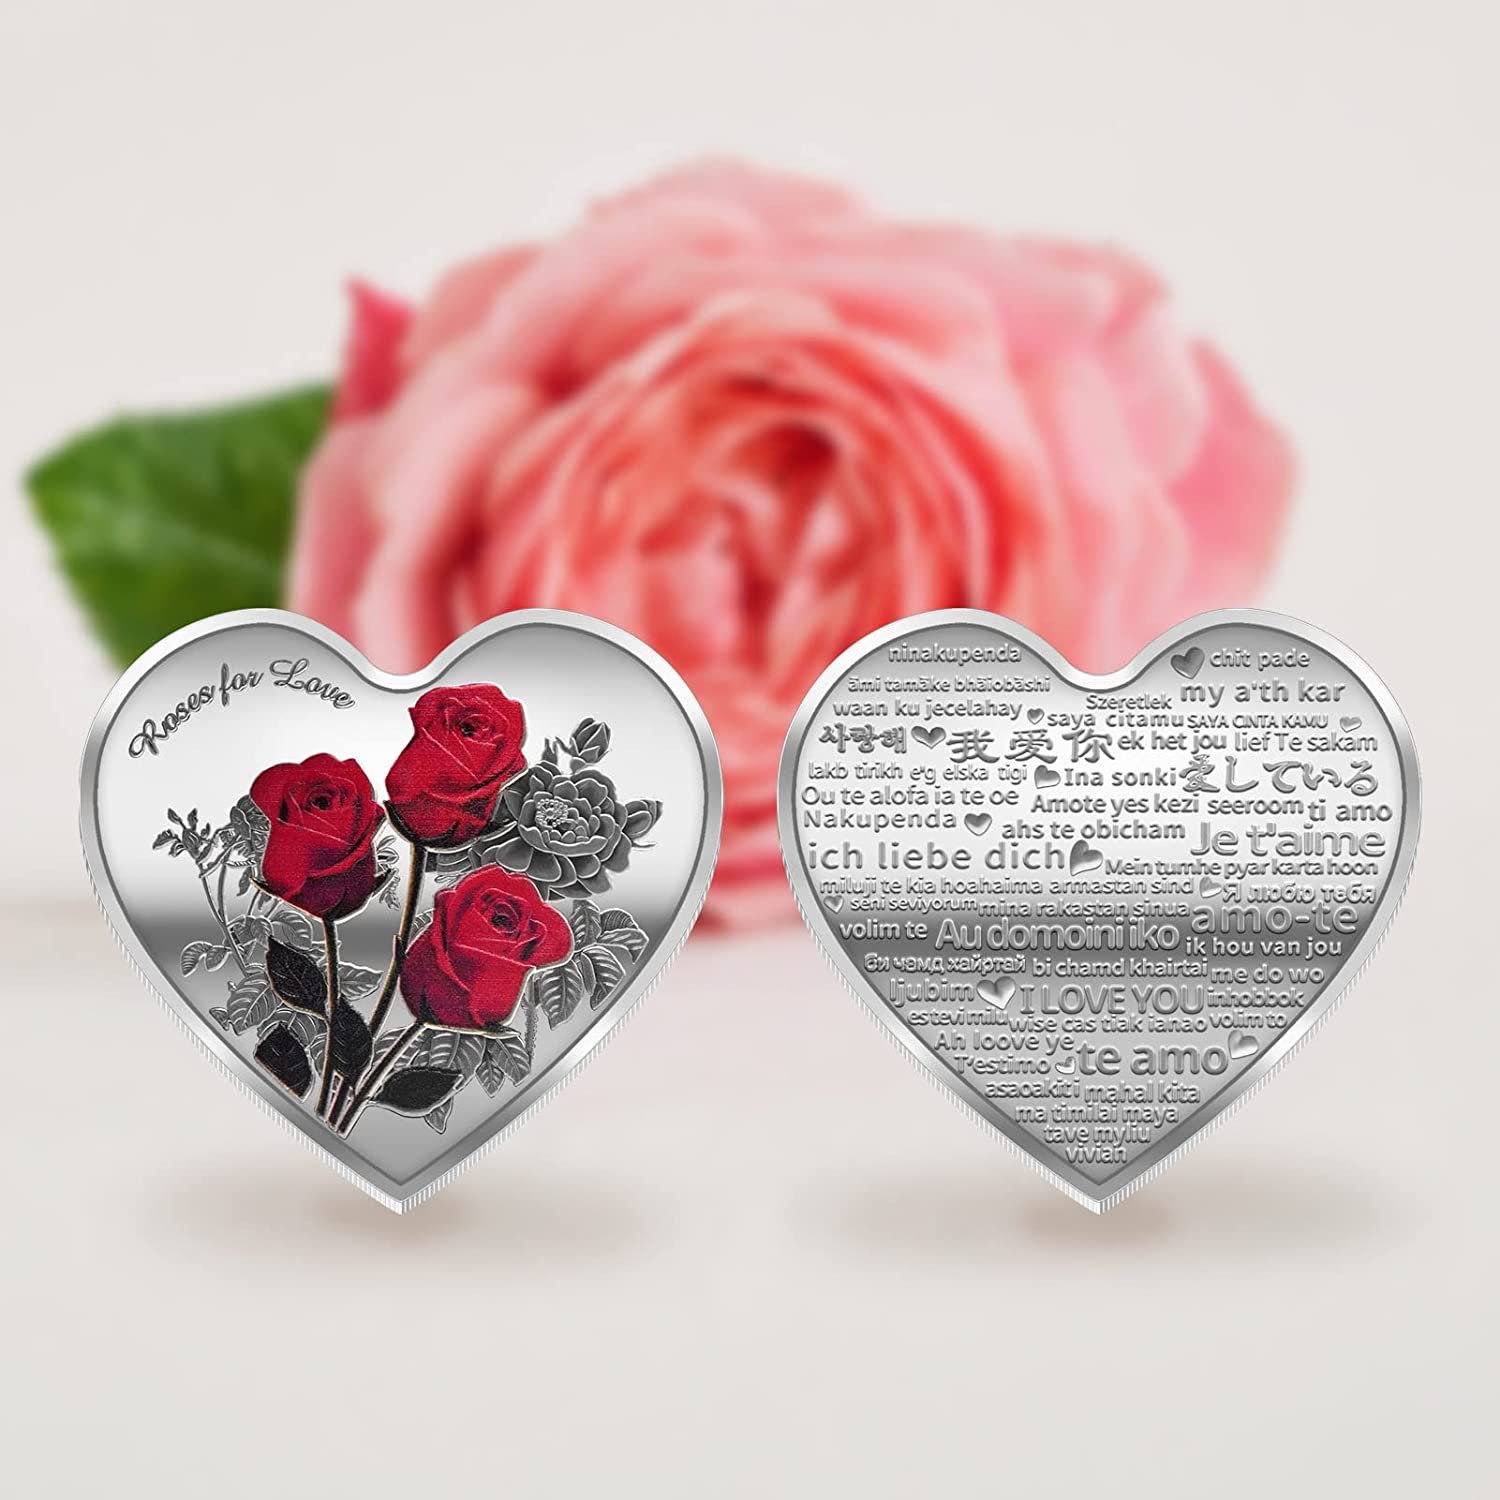 Heart Shaped Rose Coin "I Love You" in 52 Languages